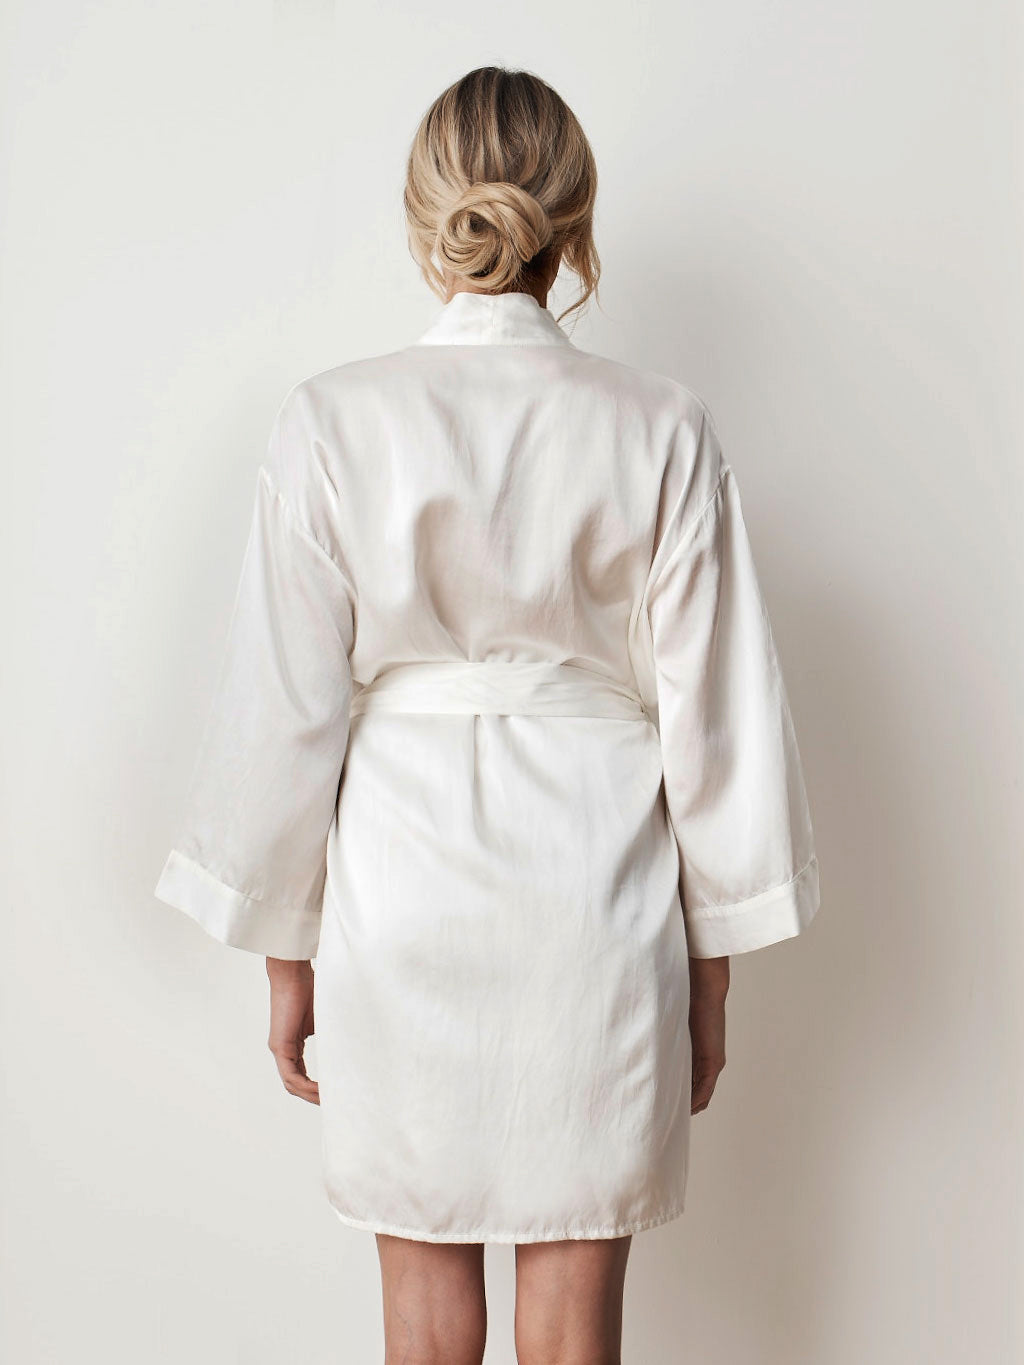 Ivory Bride Robe: Affordable Satin Robes For the Bride | Shop Now! –  PrettyRobes.com